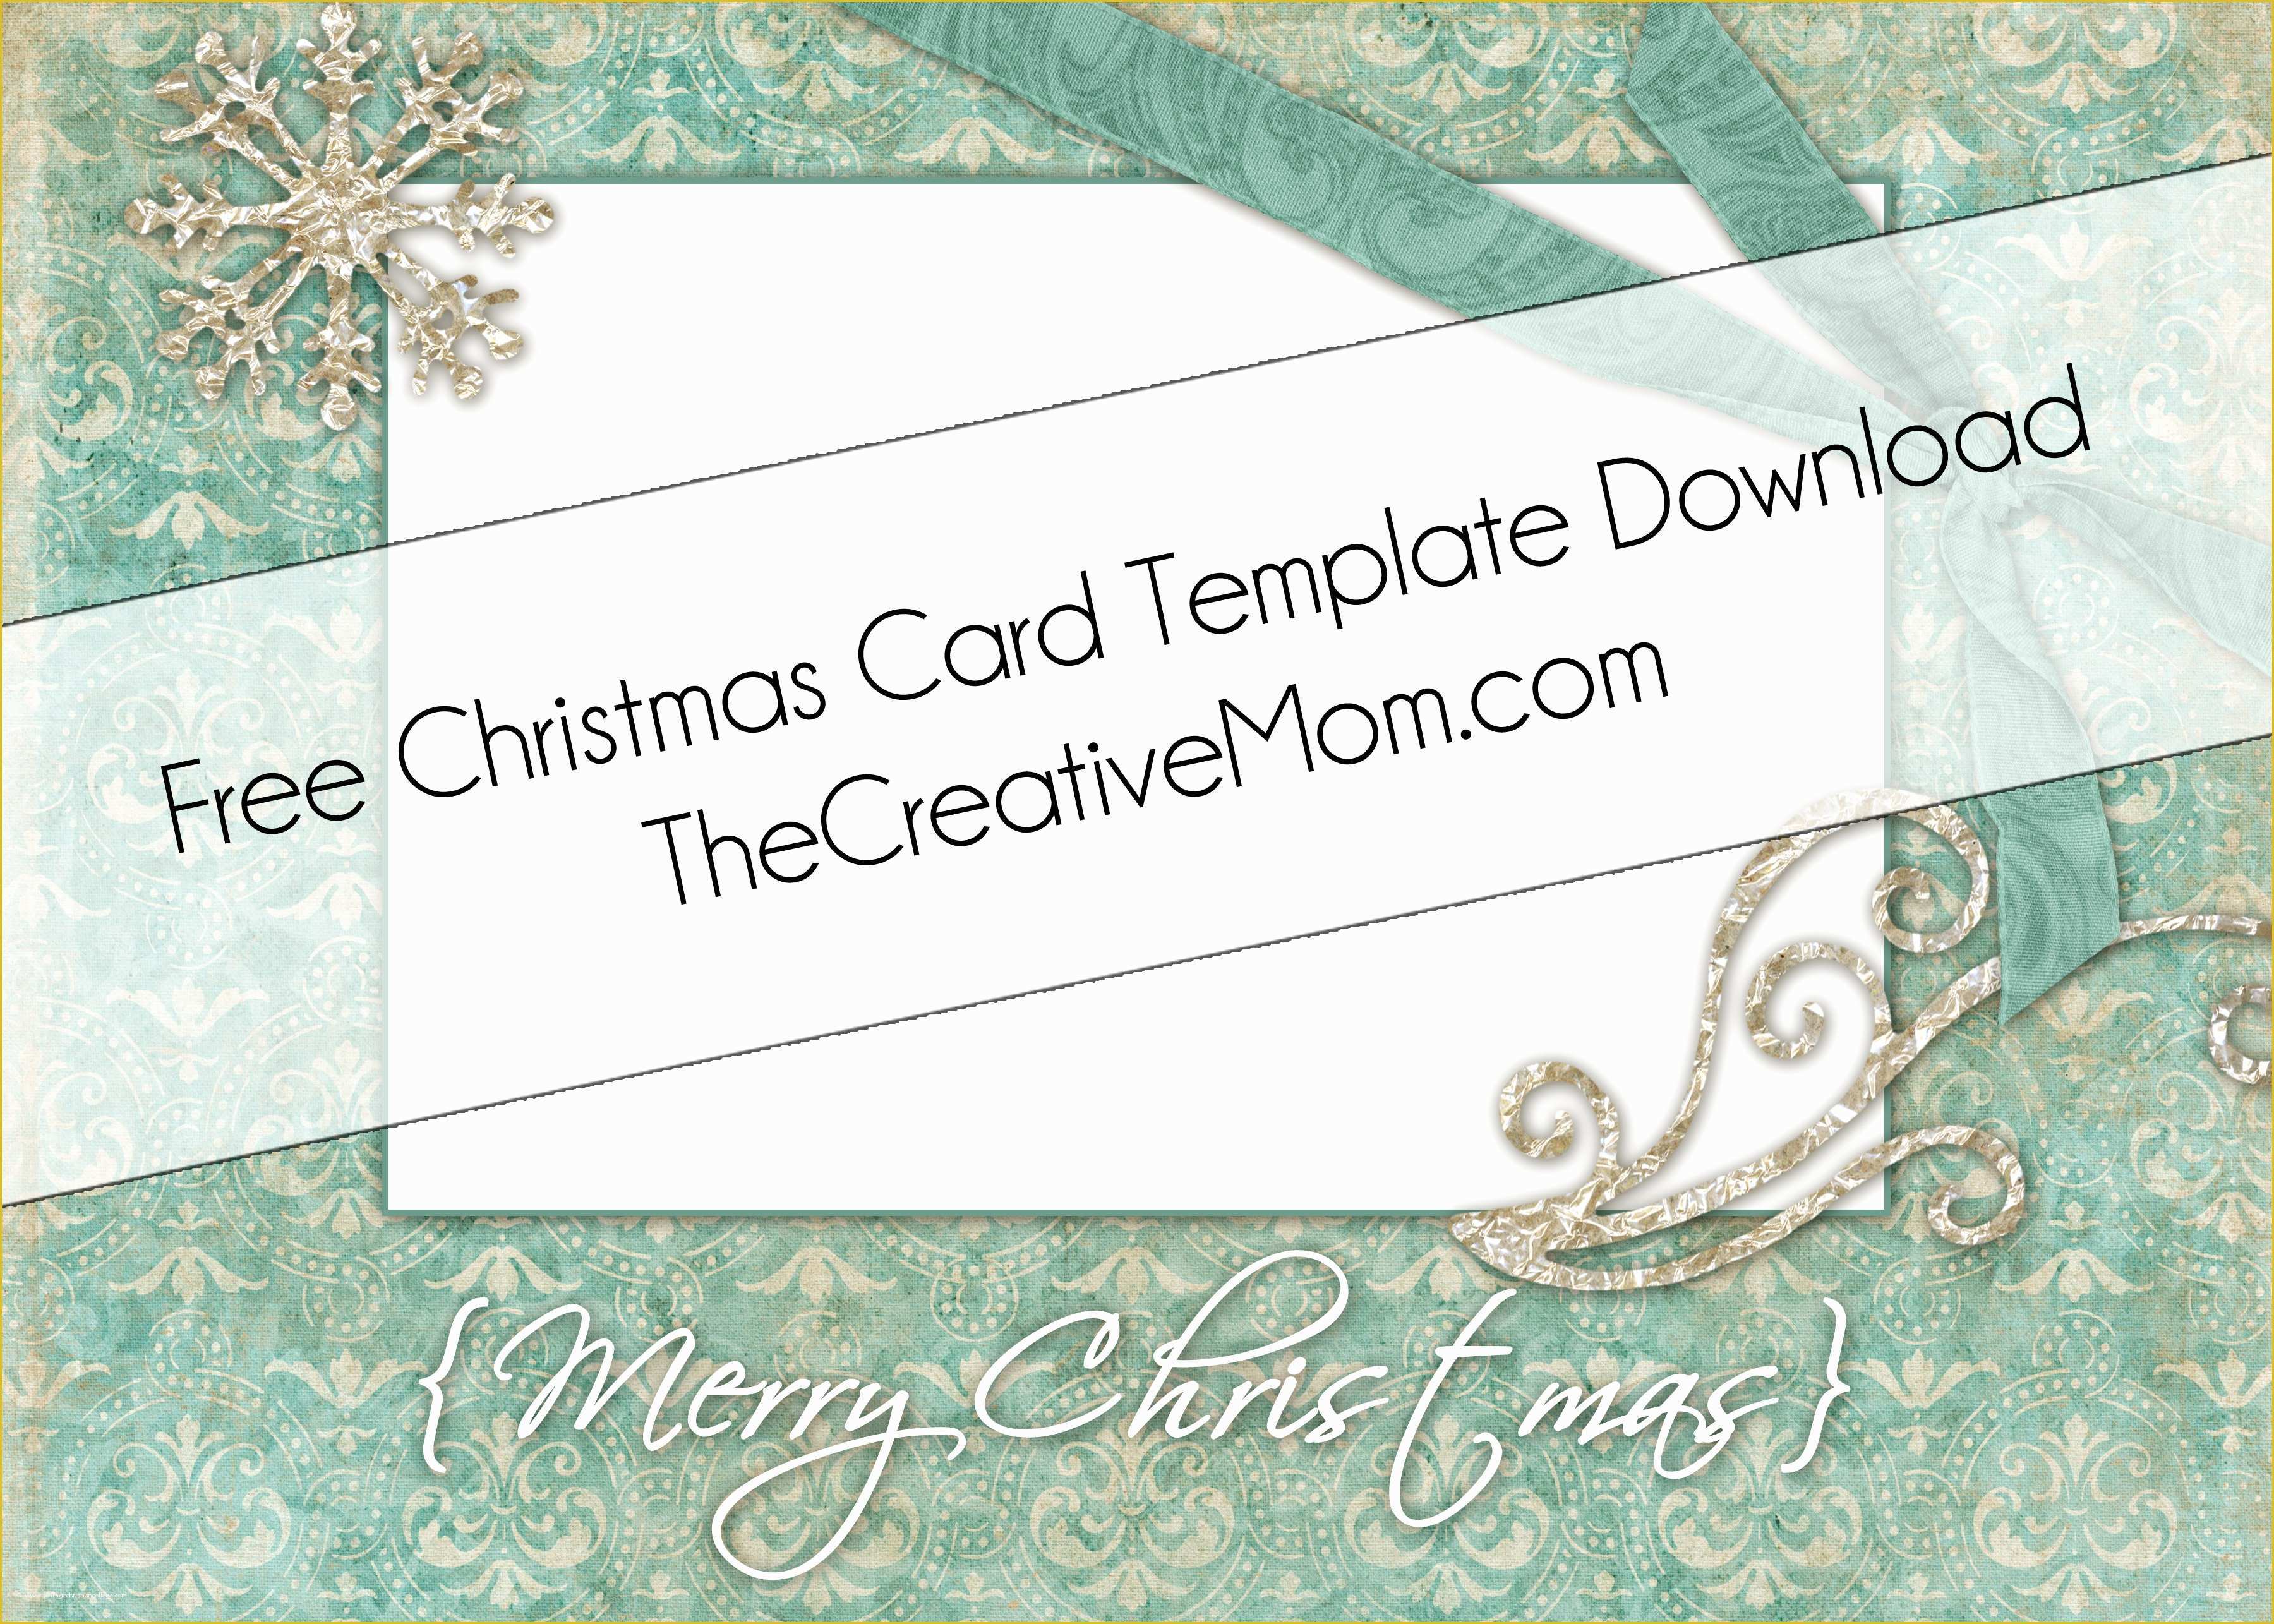 Free Holiday Card Templates Of Christmas Card Templates Free Download the Creative Mom